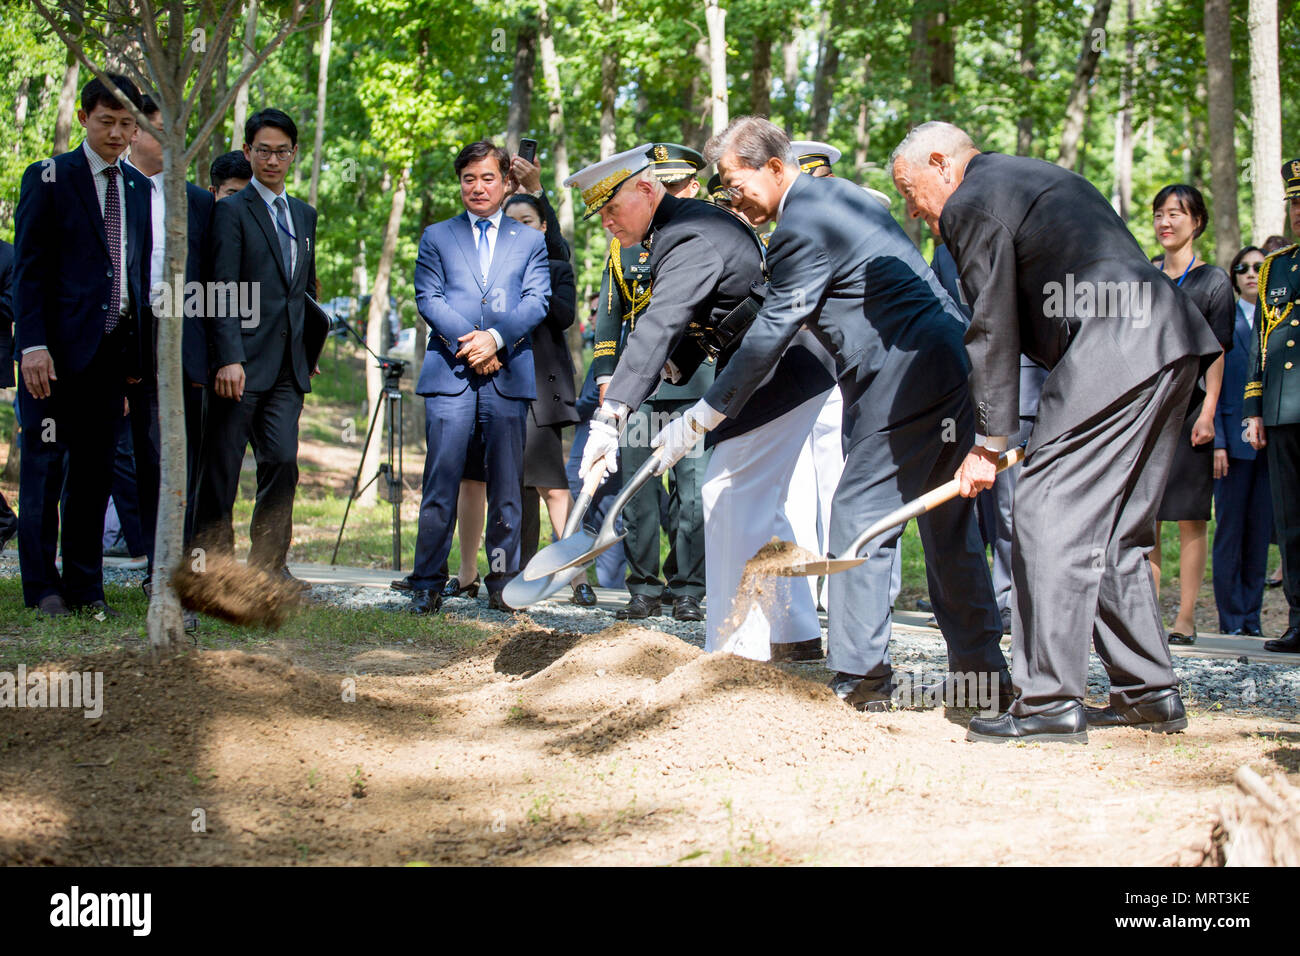 Gen. Robert B. Neller, Commandant of the Marine Corps; President Moon Jae-in, president of the Republic of Korea; and Lt. Col. (Ret) Stephen Olmstead, Korean War veteran, plant a tree at the National Museum of the Marine Corps in Quantico,Virginia, on June 28, 2017. President Moon donated the tree to honor the service of Korean War veterans.  (U.S. Marine Corps Photo by Lance Cpl. Jamie Arzola) Stock Photo